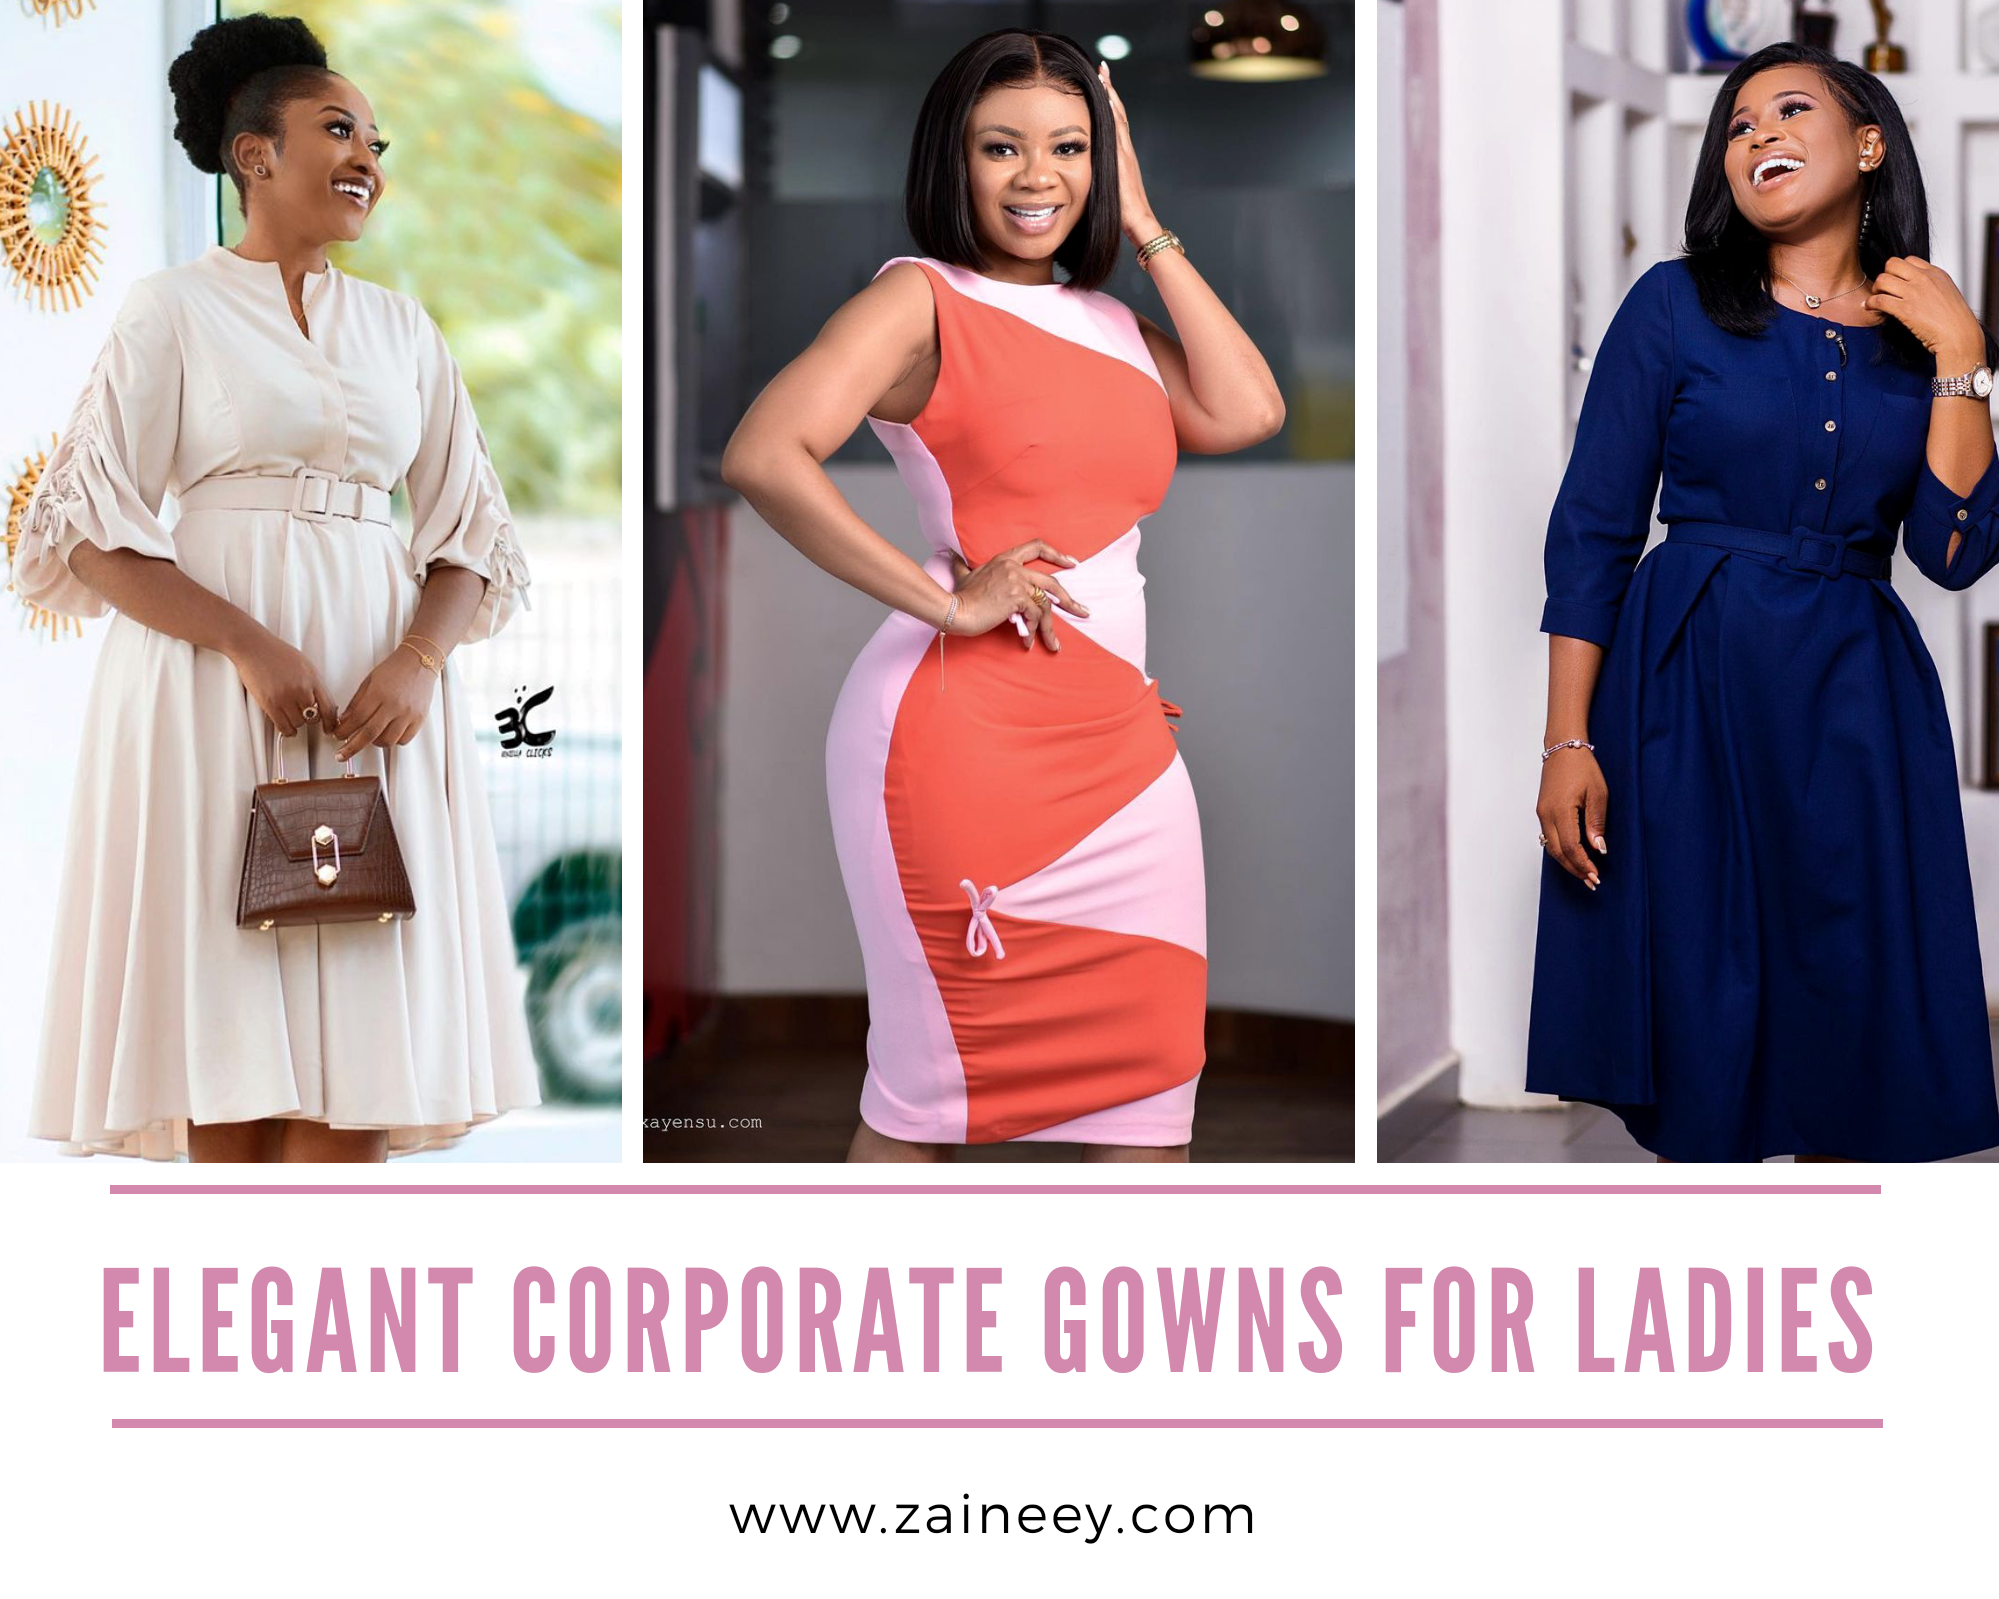 Latest corporate gown styles | Zaineey's Blog